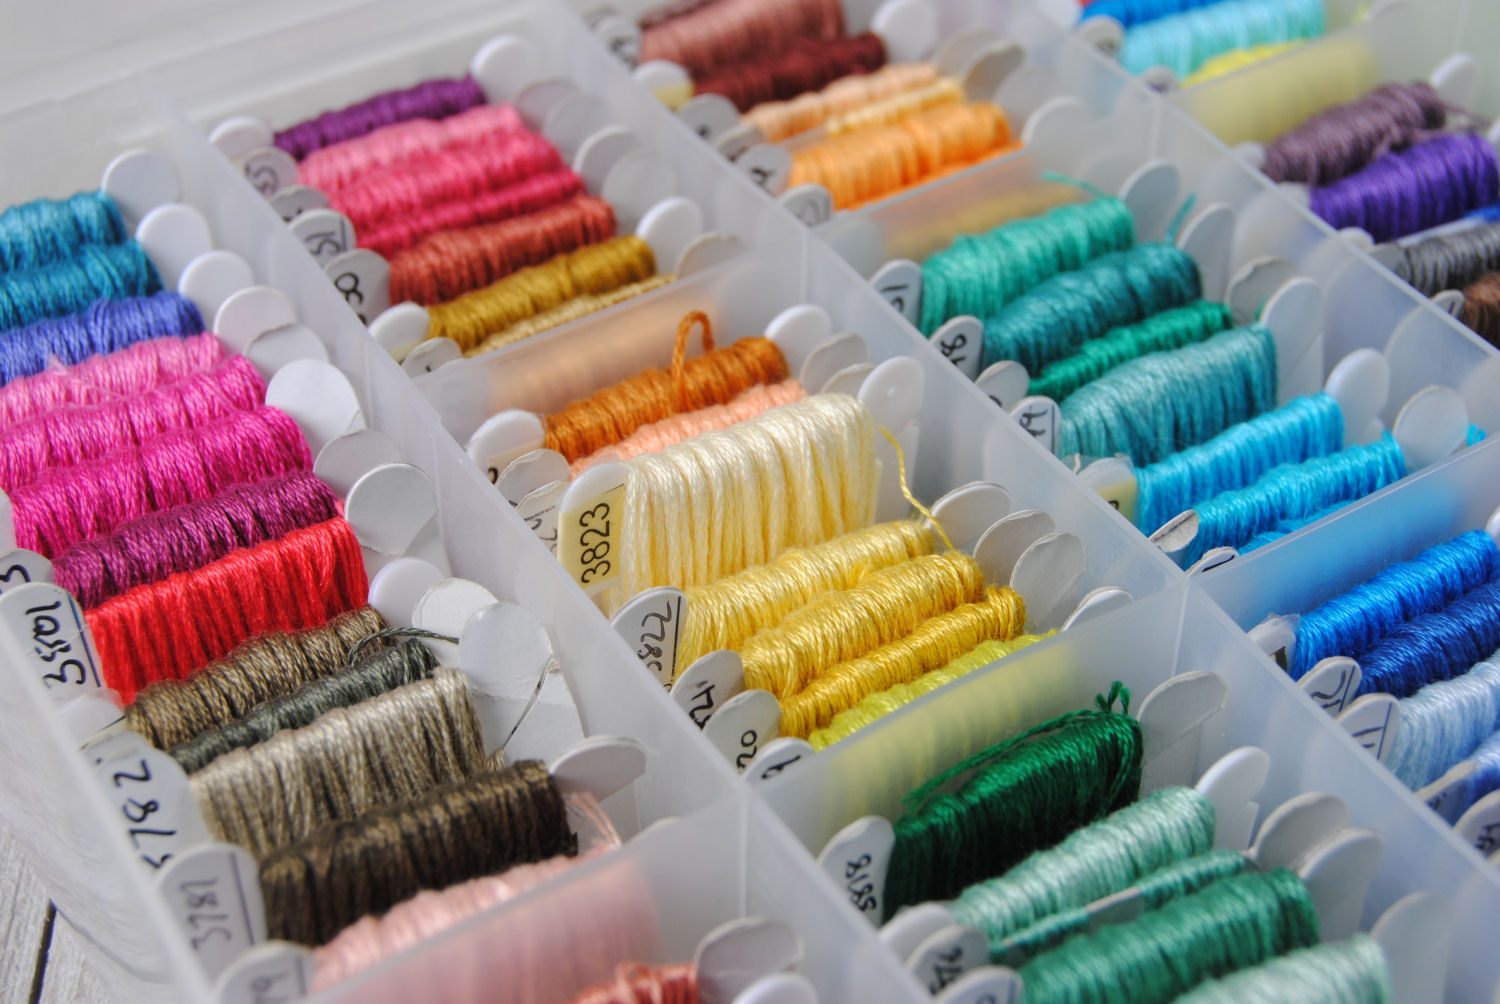 Make Your Own Bobbins for Embroidery or Crochet Thread With Only